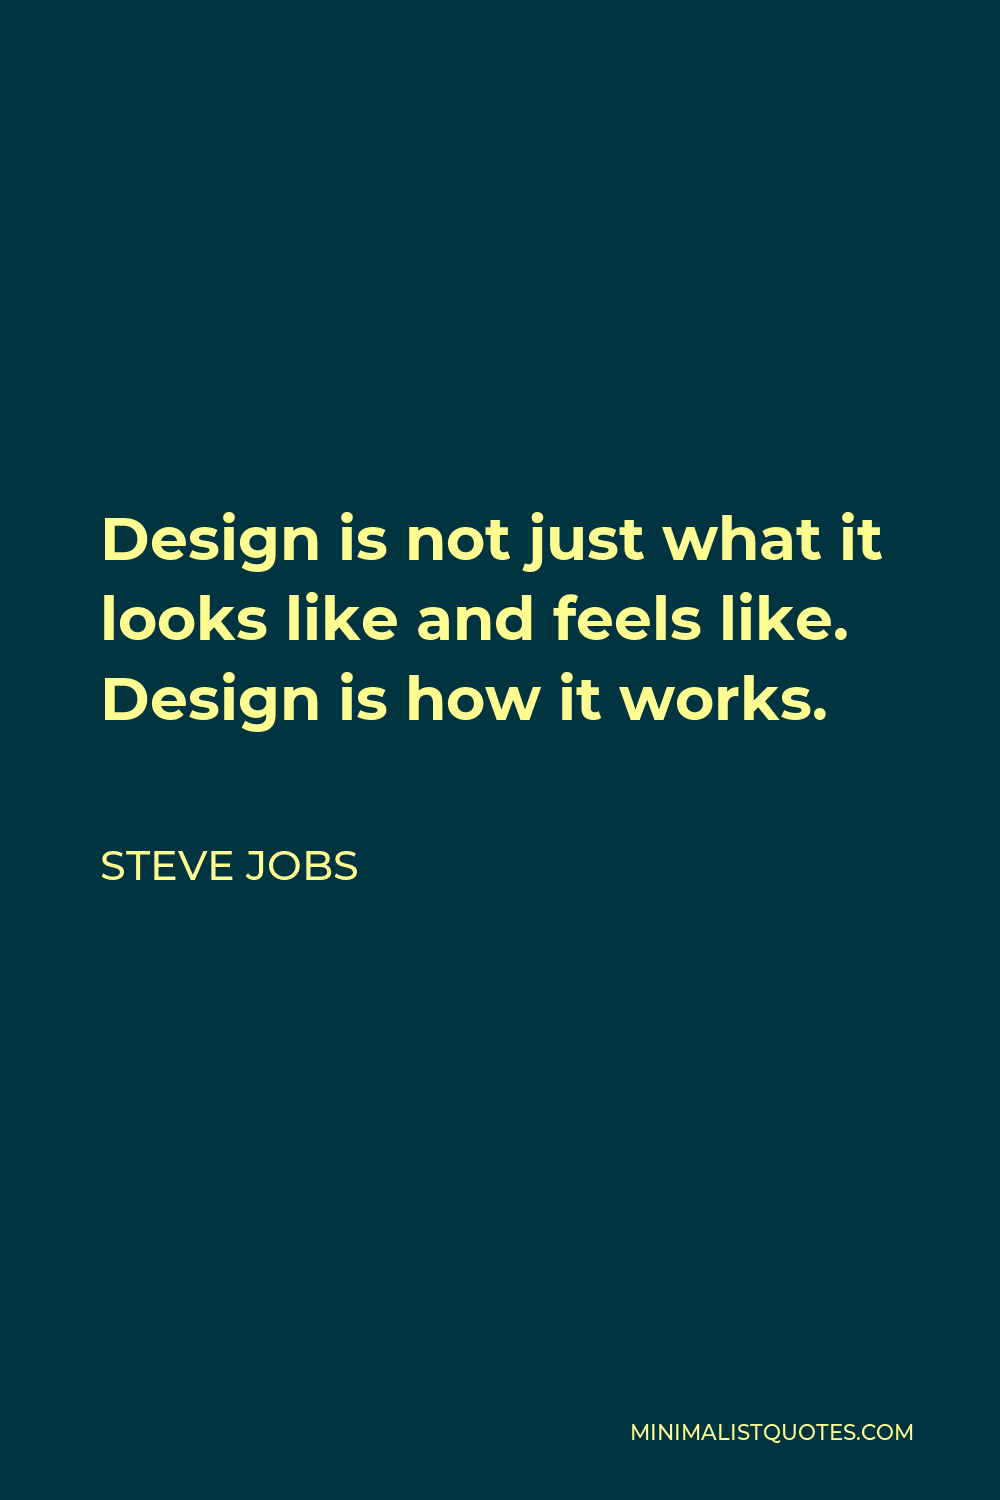 Steve Jobs Quote - Design is not just what it looks like and feels like. Design is how it works.